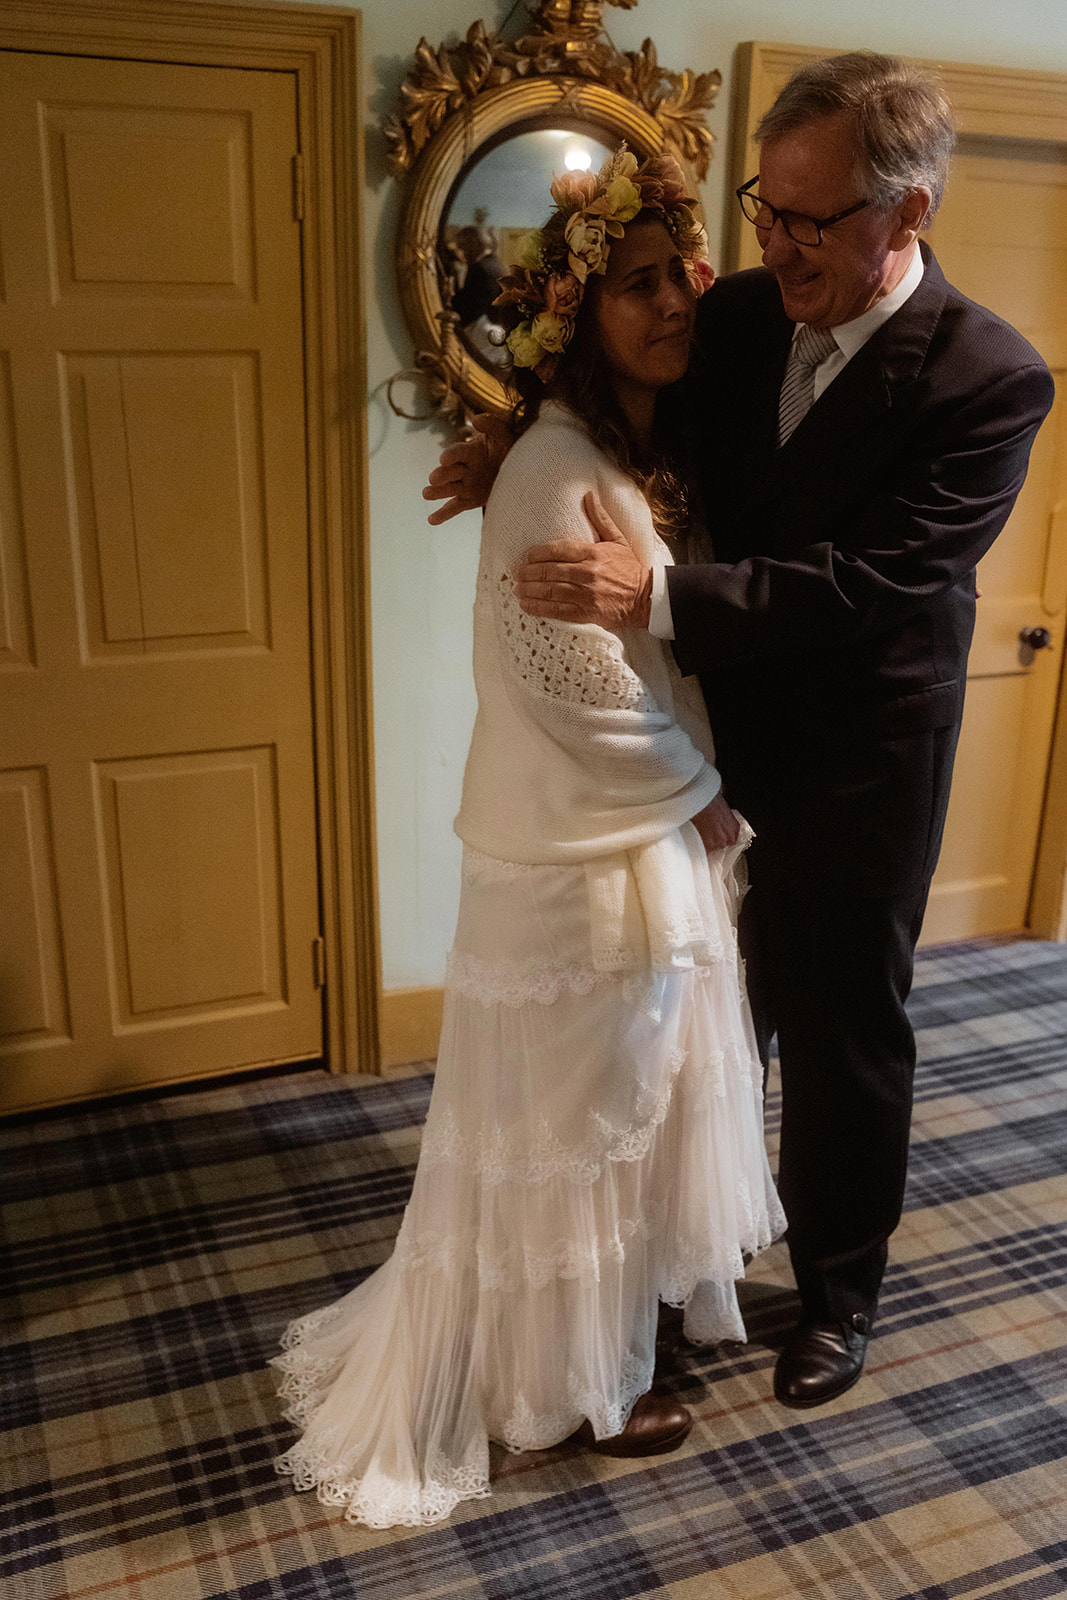 Becca had a first look with her dad before her Tulach Ard Wedding celebration at the Isle of Skye, Scotland